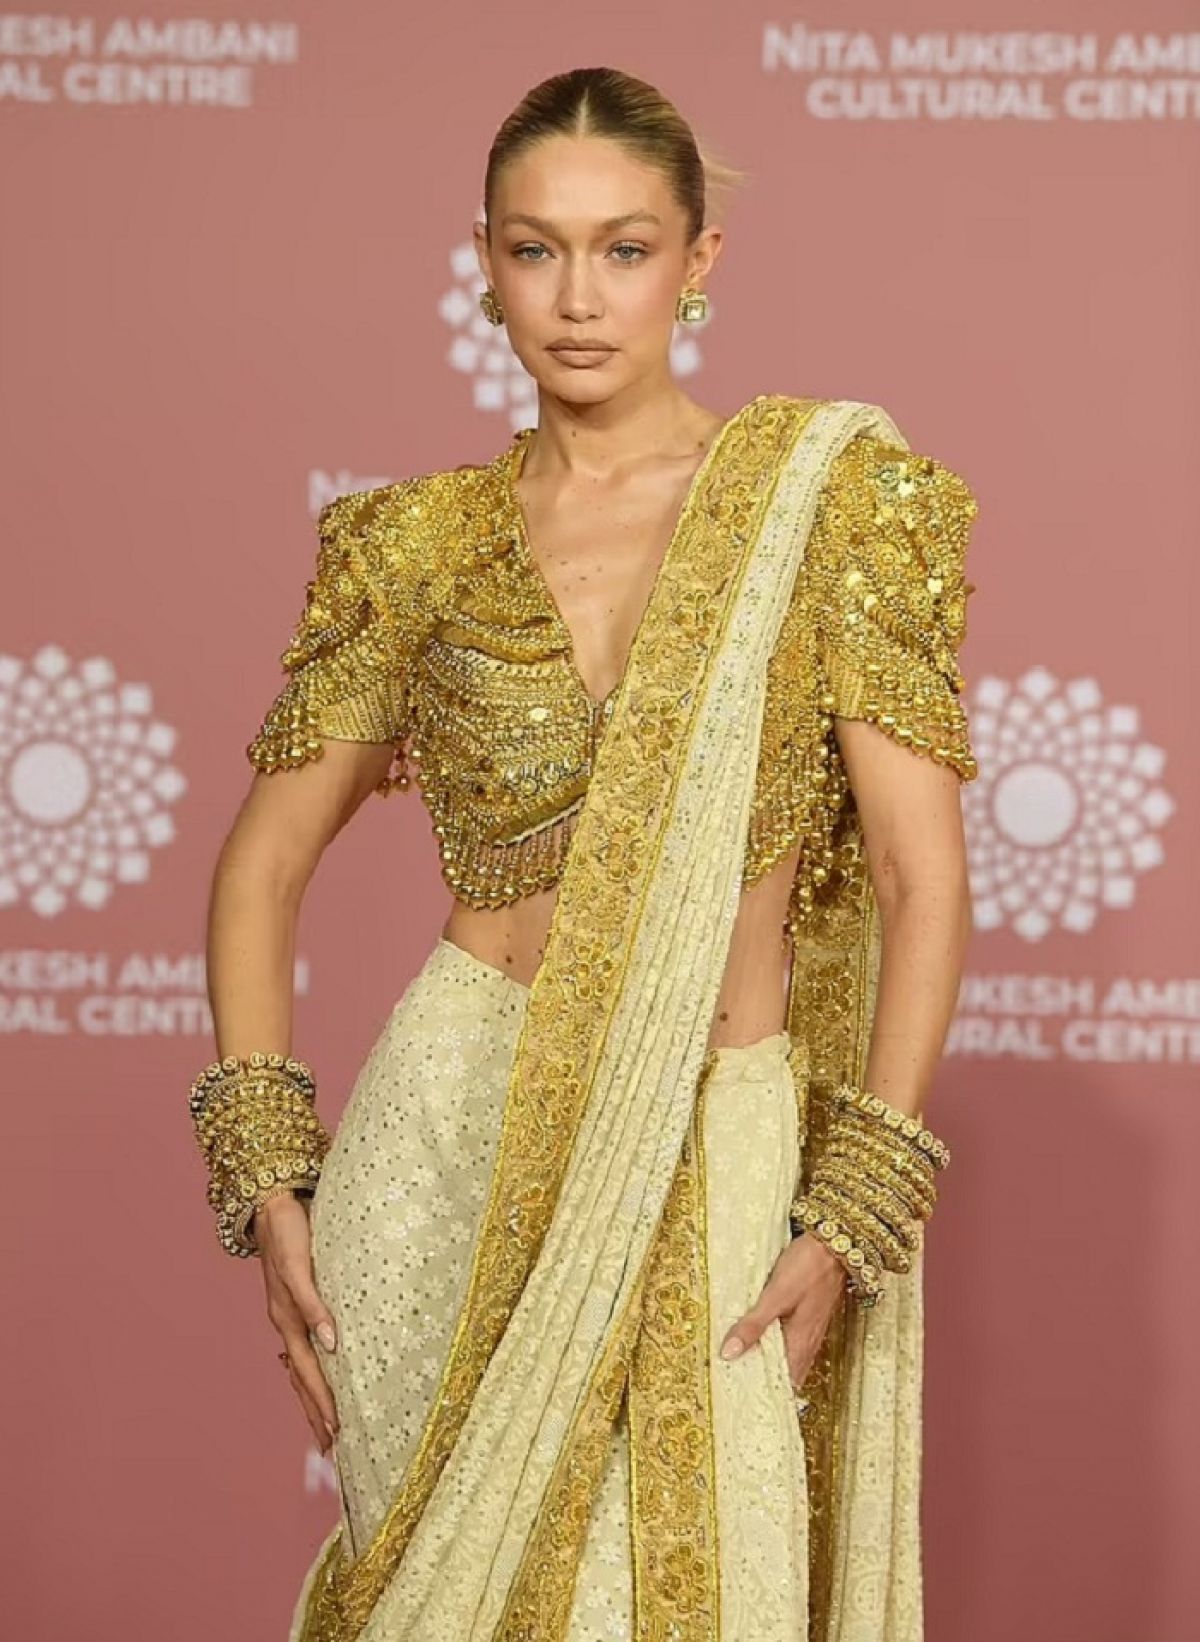 This Hollywood queen adds a desi look to Ambani's event.